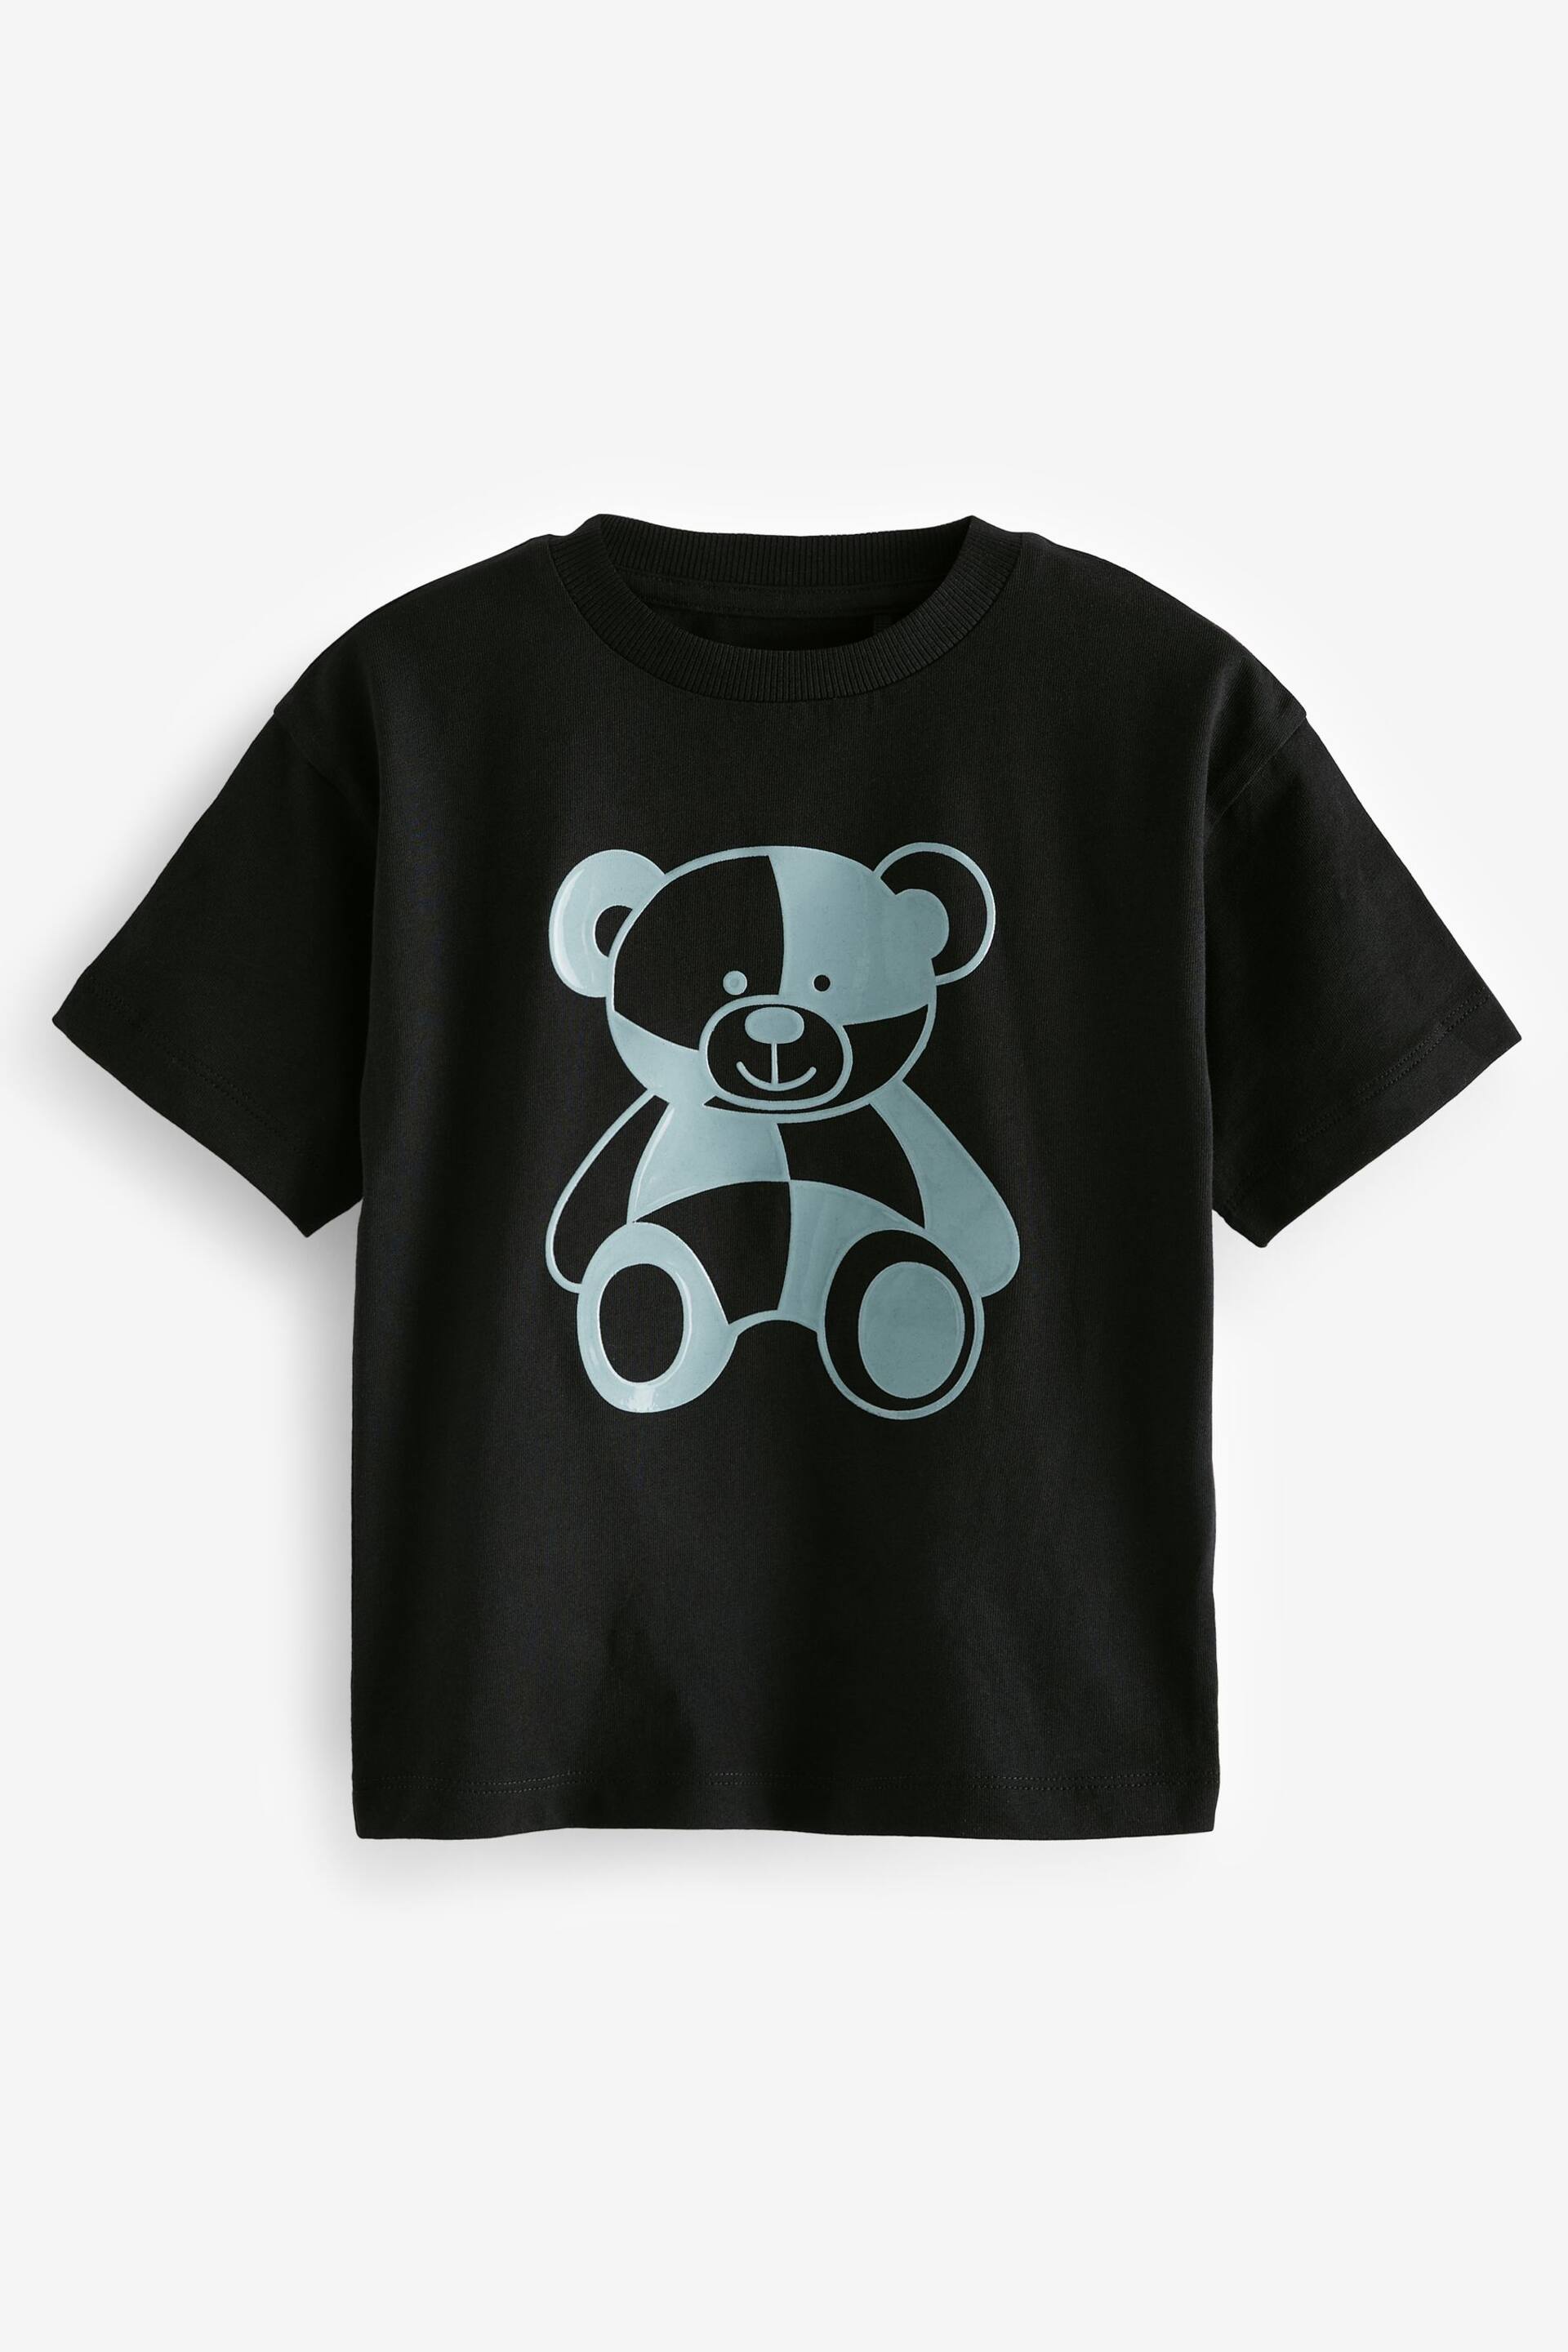 Blue/Black Short Sleeve Character T-Shirts 3 Pack (3mths-7yrs) - Image 3 of 7